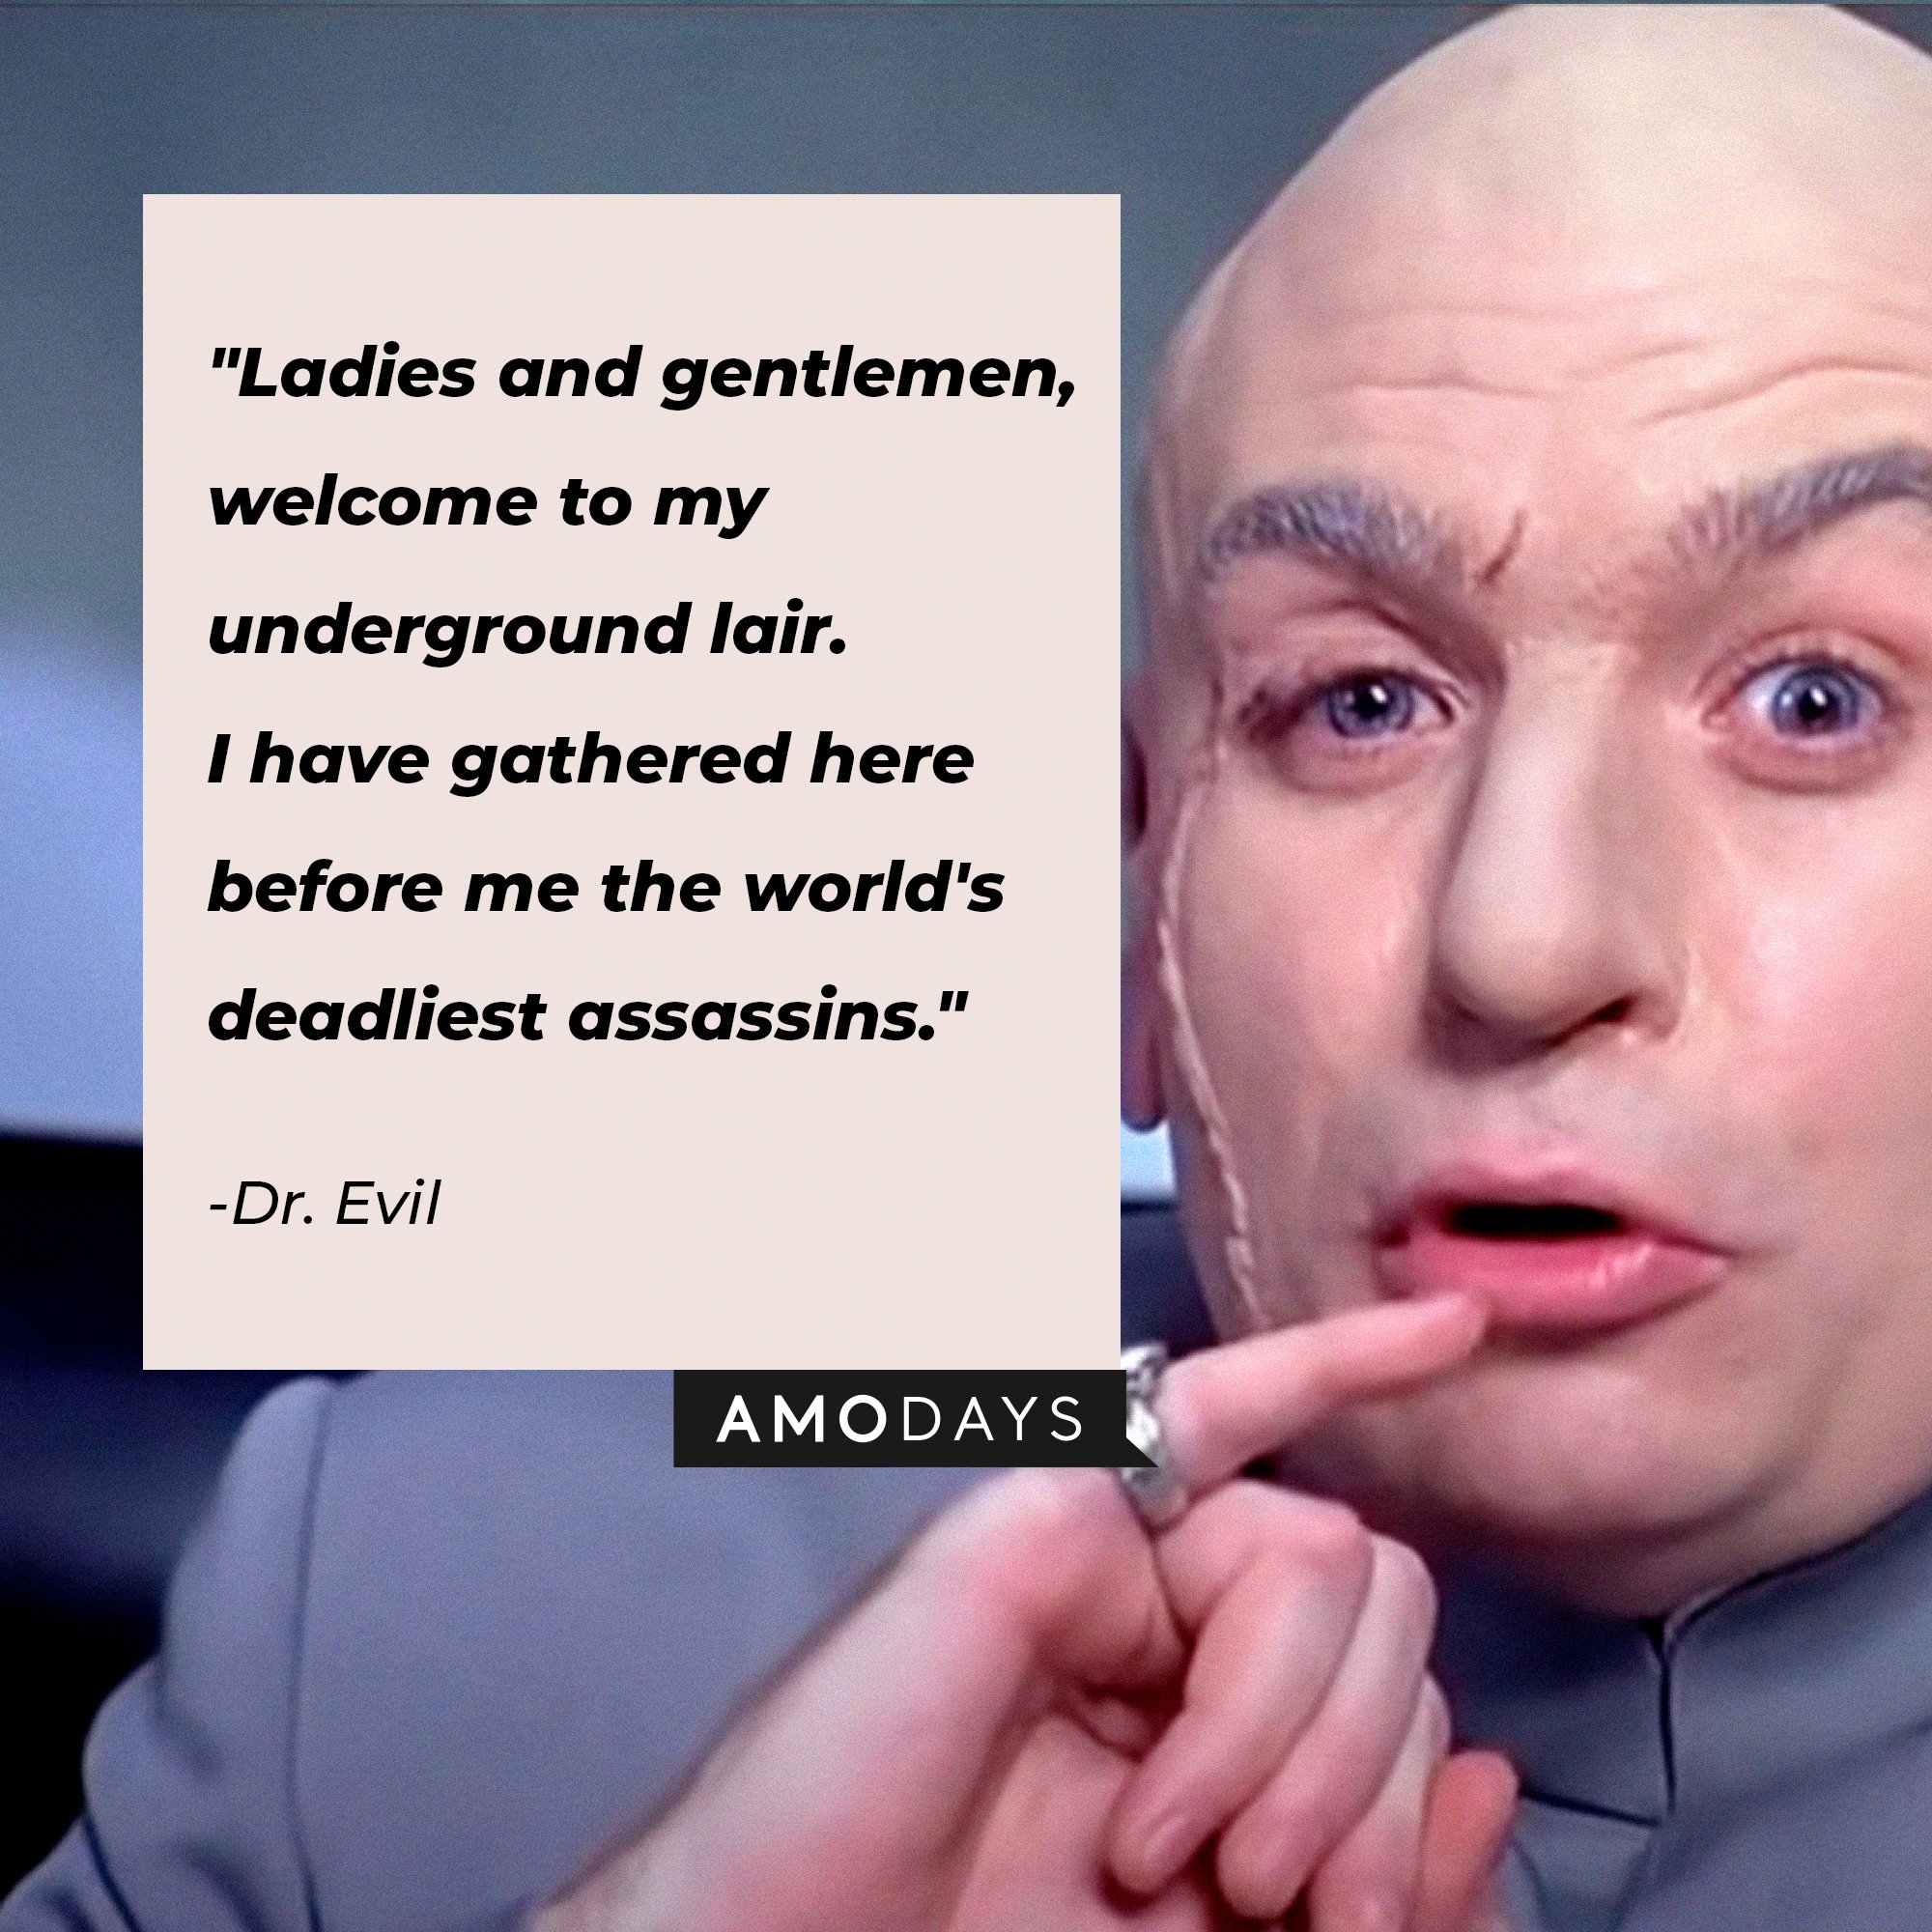  Dr. Evil’s quote: "Ladies and gentlemen, welcome to my underground lair. I have gathered here before me the world's deadliest assassins." | Image: Amodays